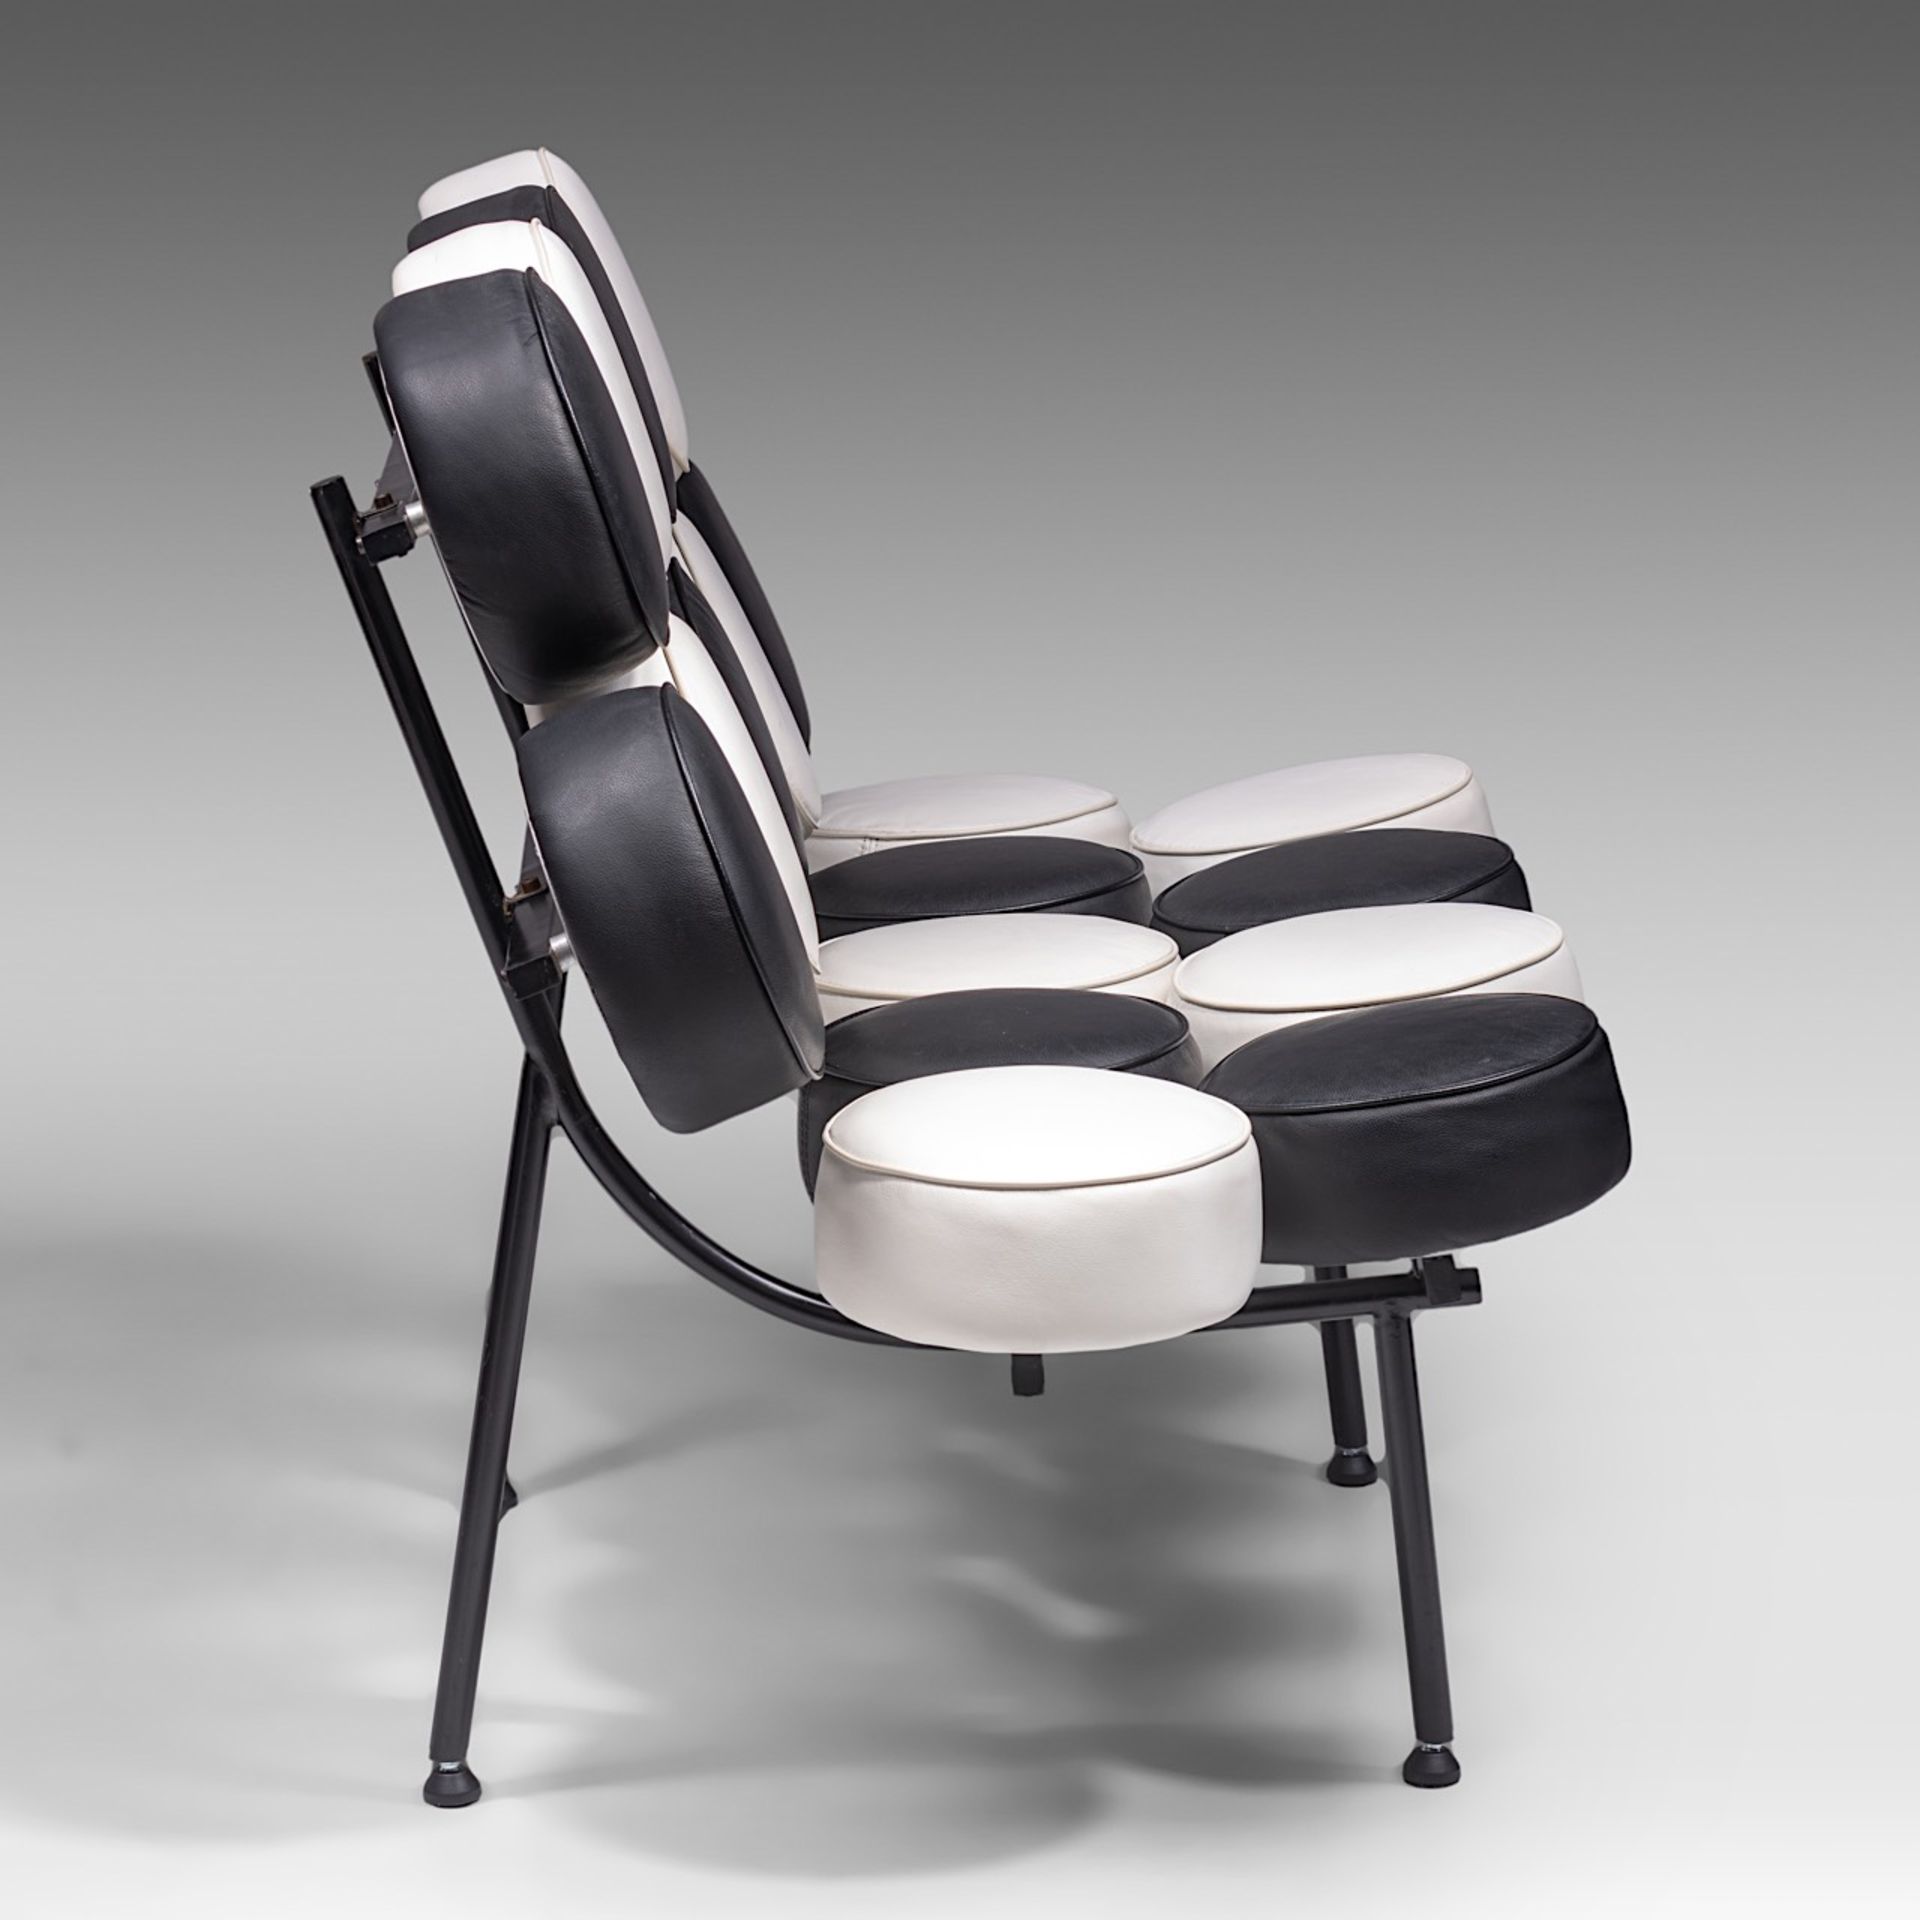 A 'Nelson Marshmallow' Seat, by Irving Harper (1956), H 98 - W 135 cm - Image 5 of 6